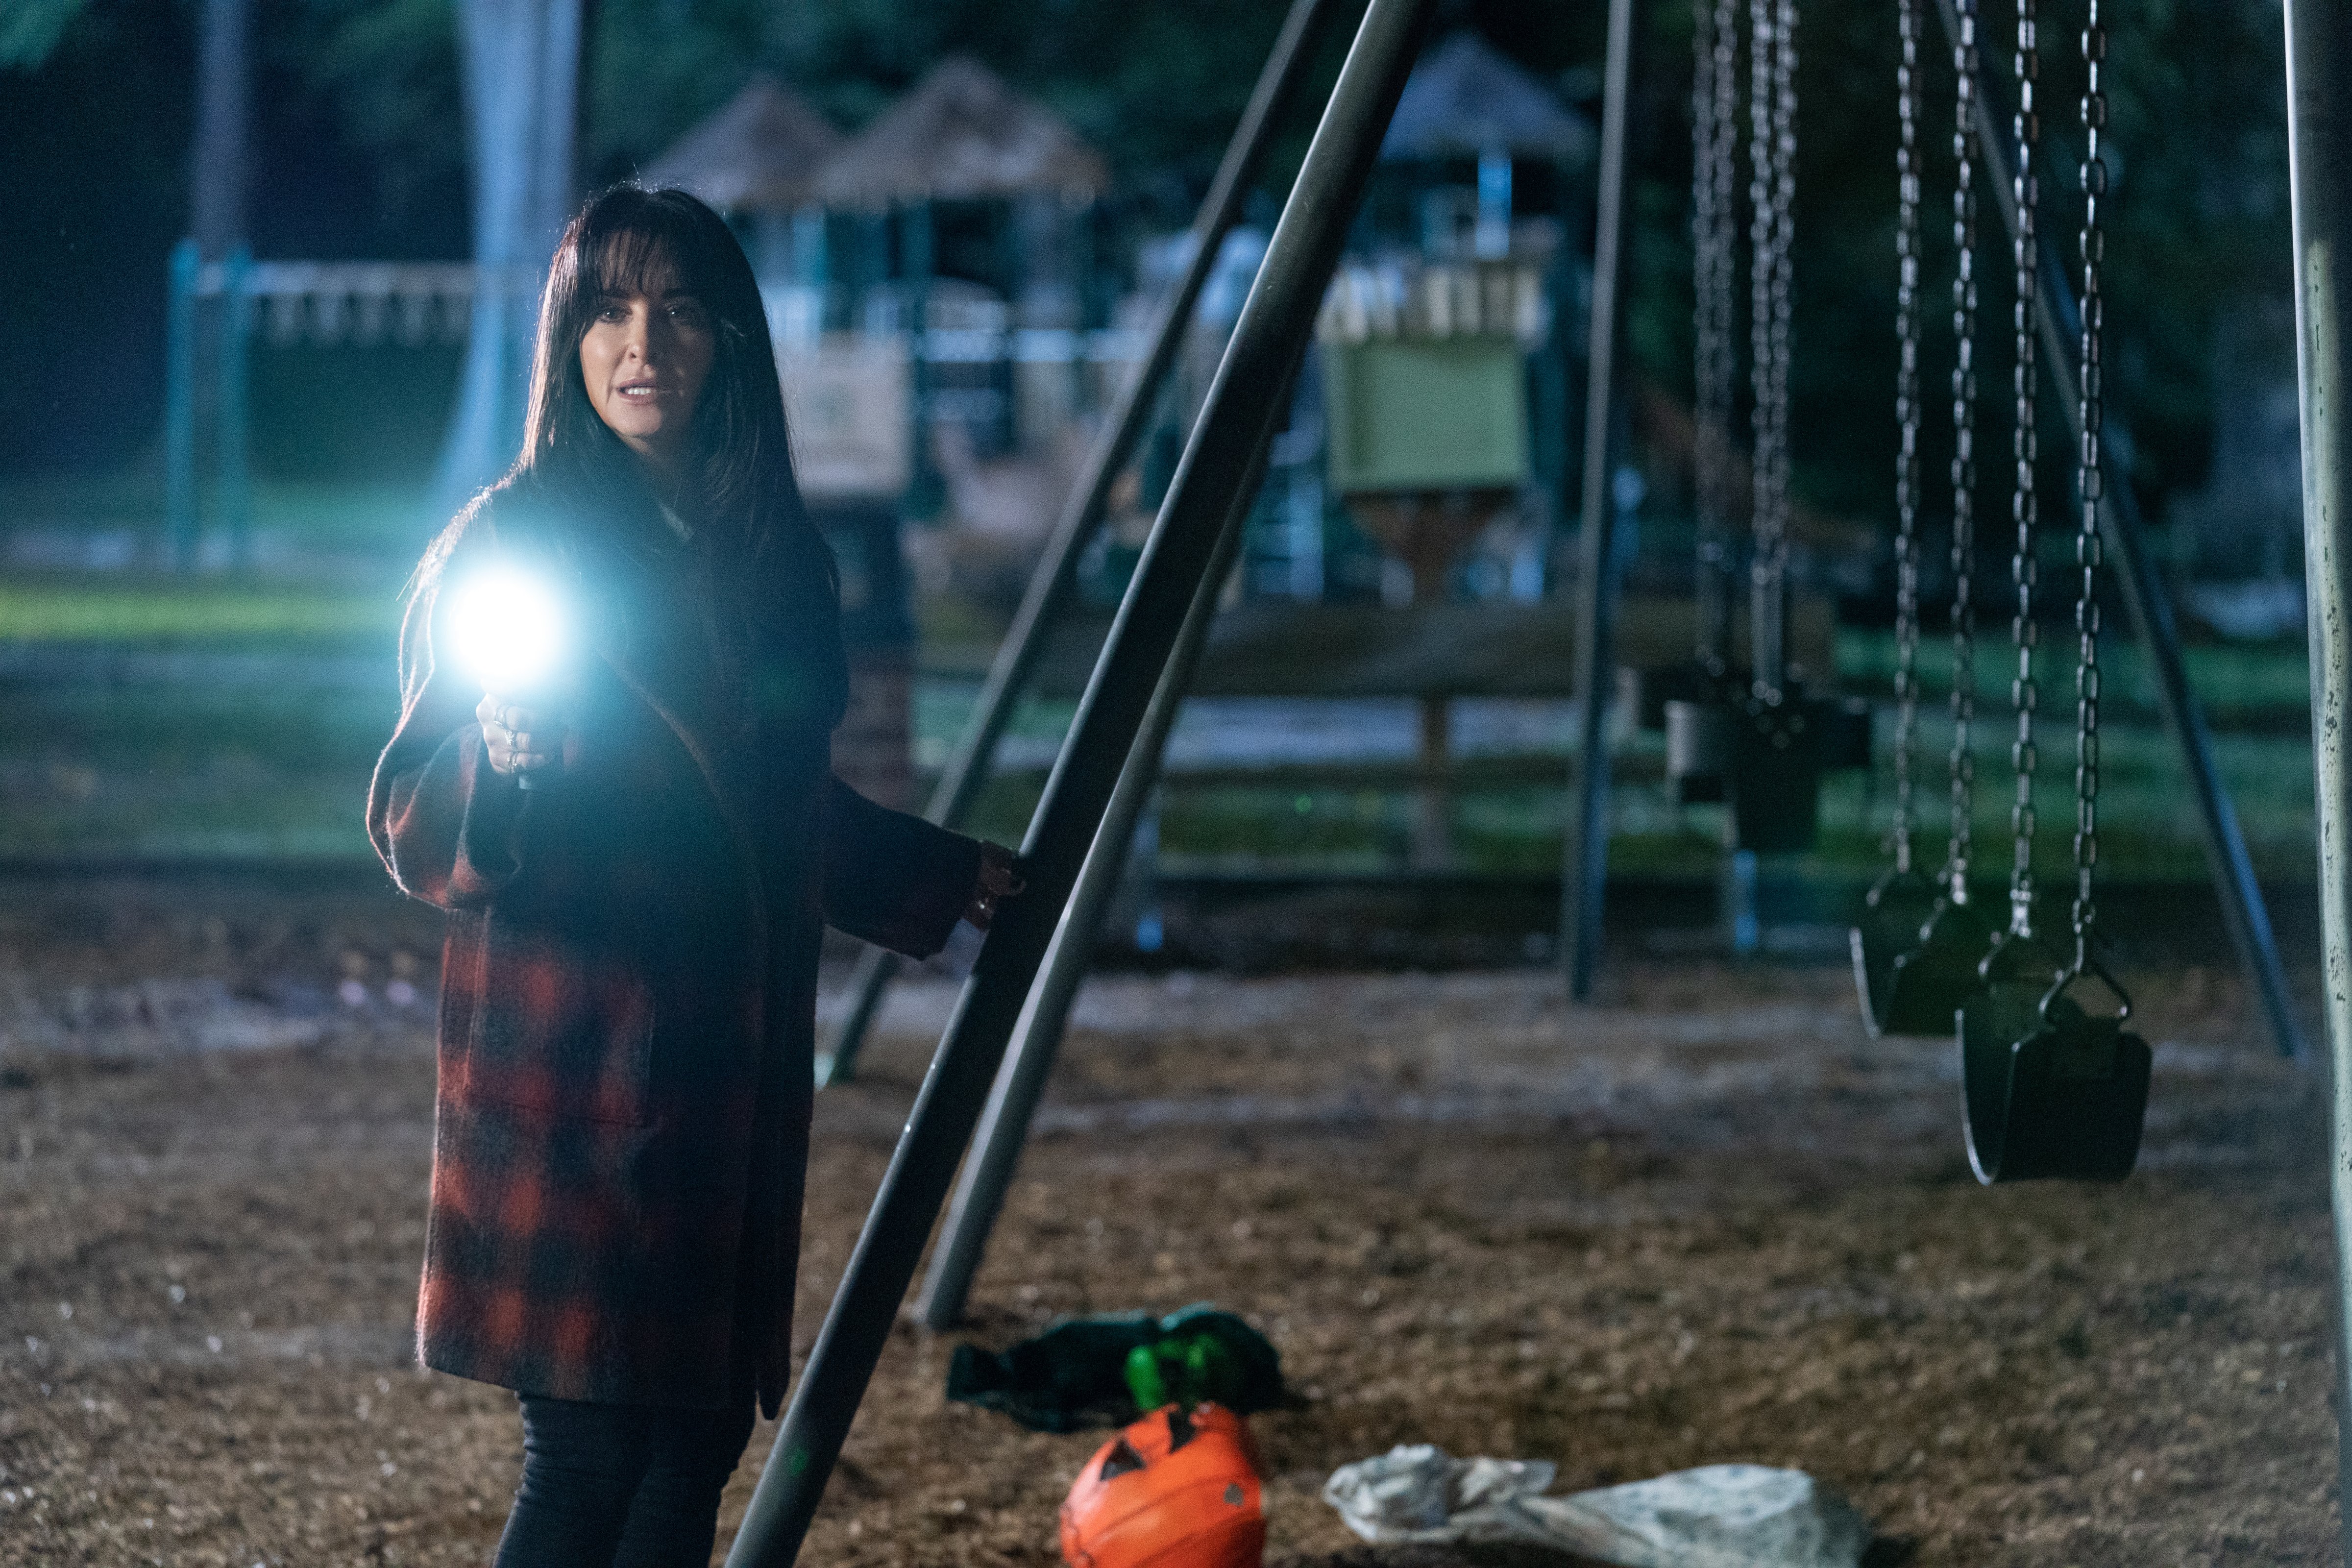 Kyle Richards as Lindsey in Halloween Kills, directed by David Gordon Green. (Photo Credit: Ryan Green/Univers—© 2021 UNIVERSAL STUDIOS. All Rights Reserved.)